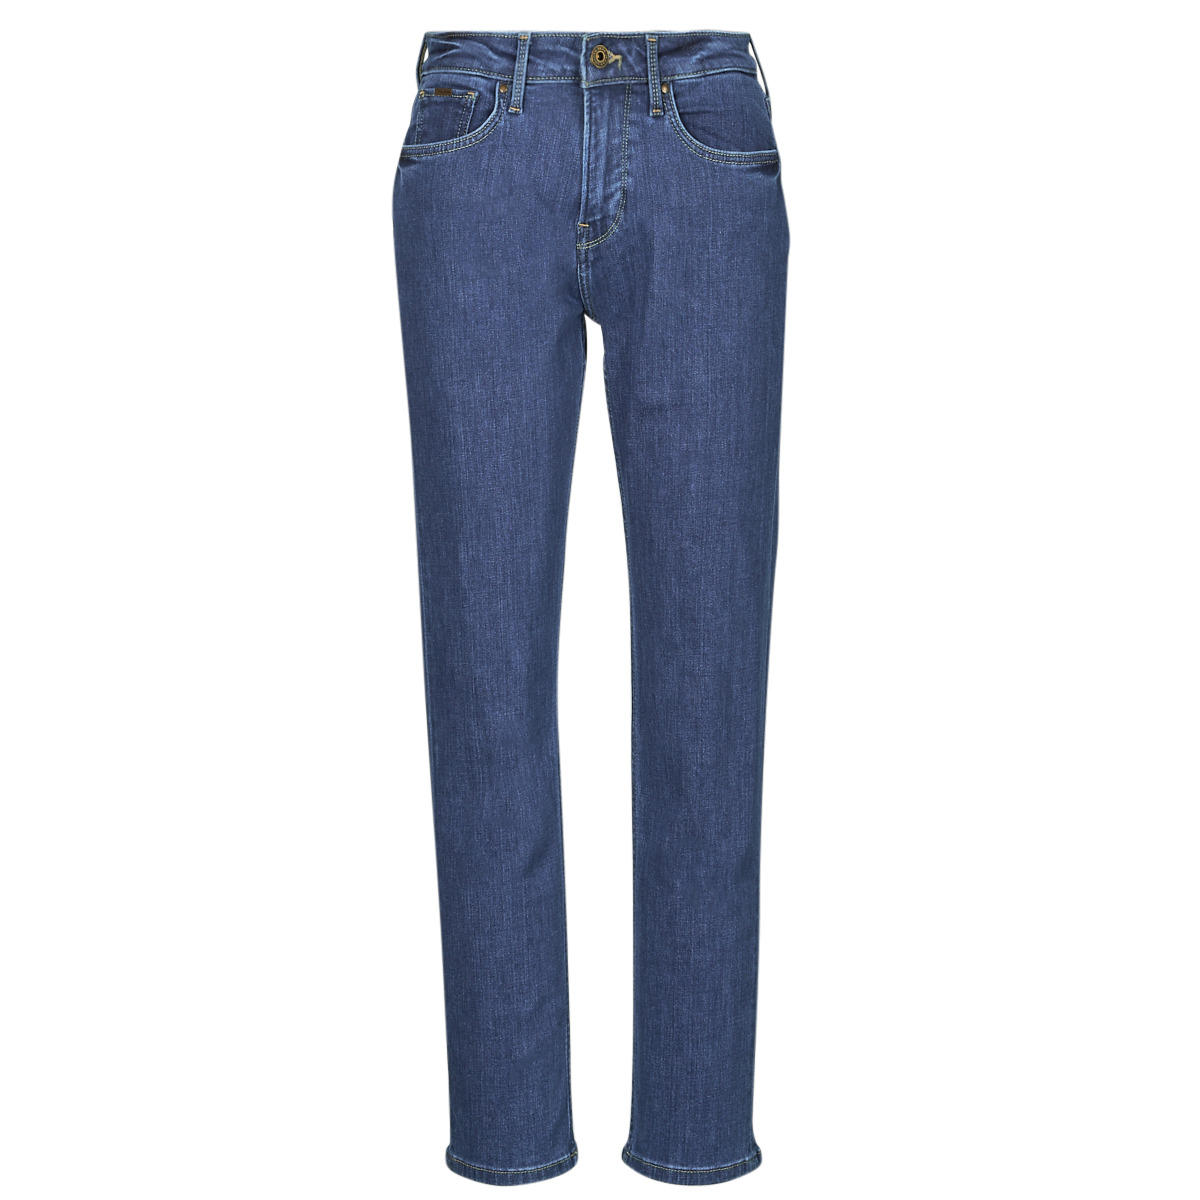 Pepe jeans  Tζιν σε ίσια γραμή Pepe jeans STRAIGHT JEANS HW